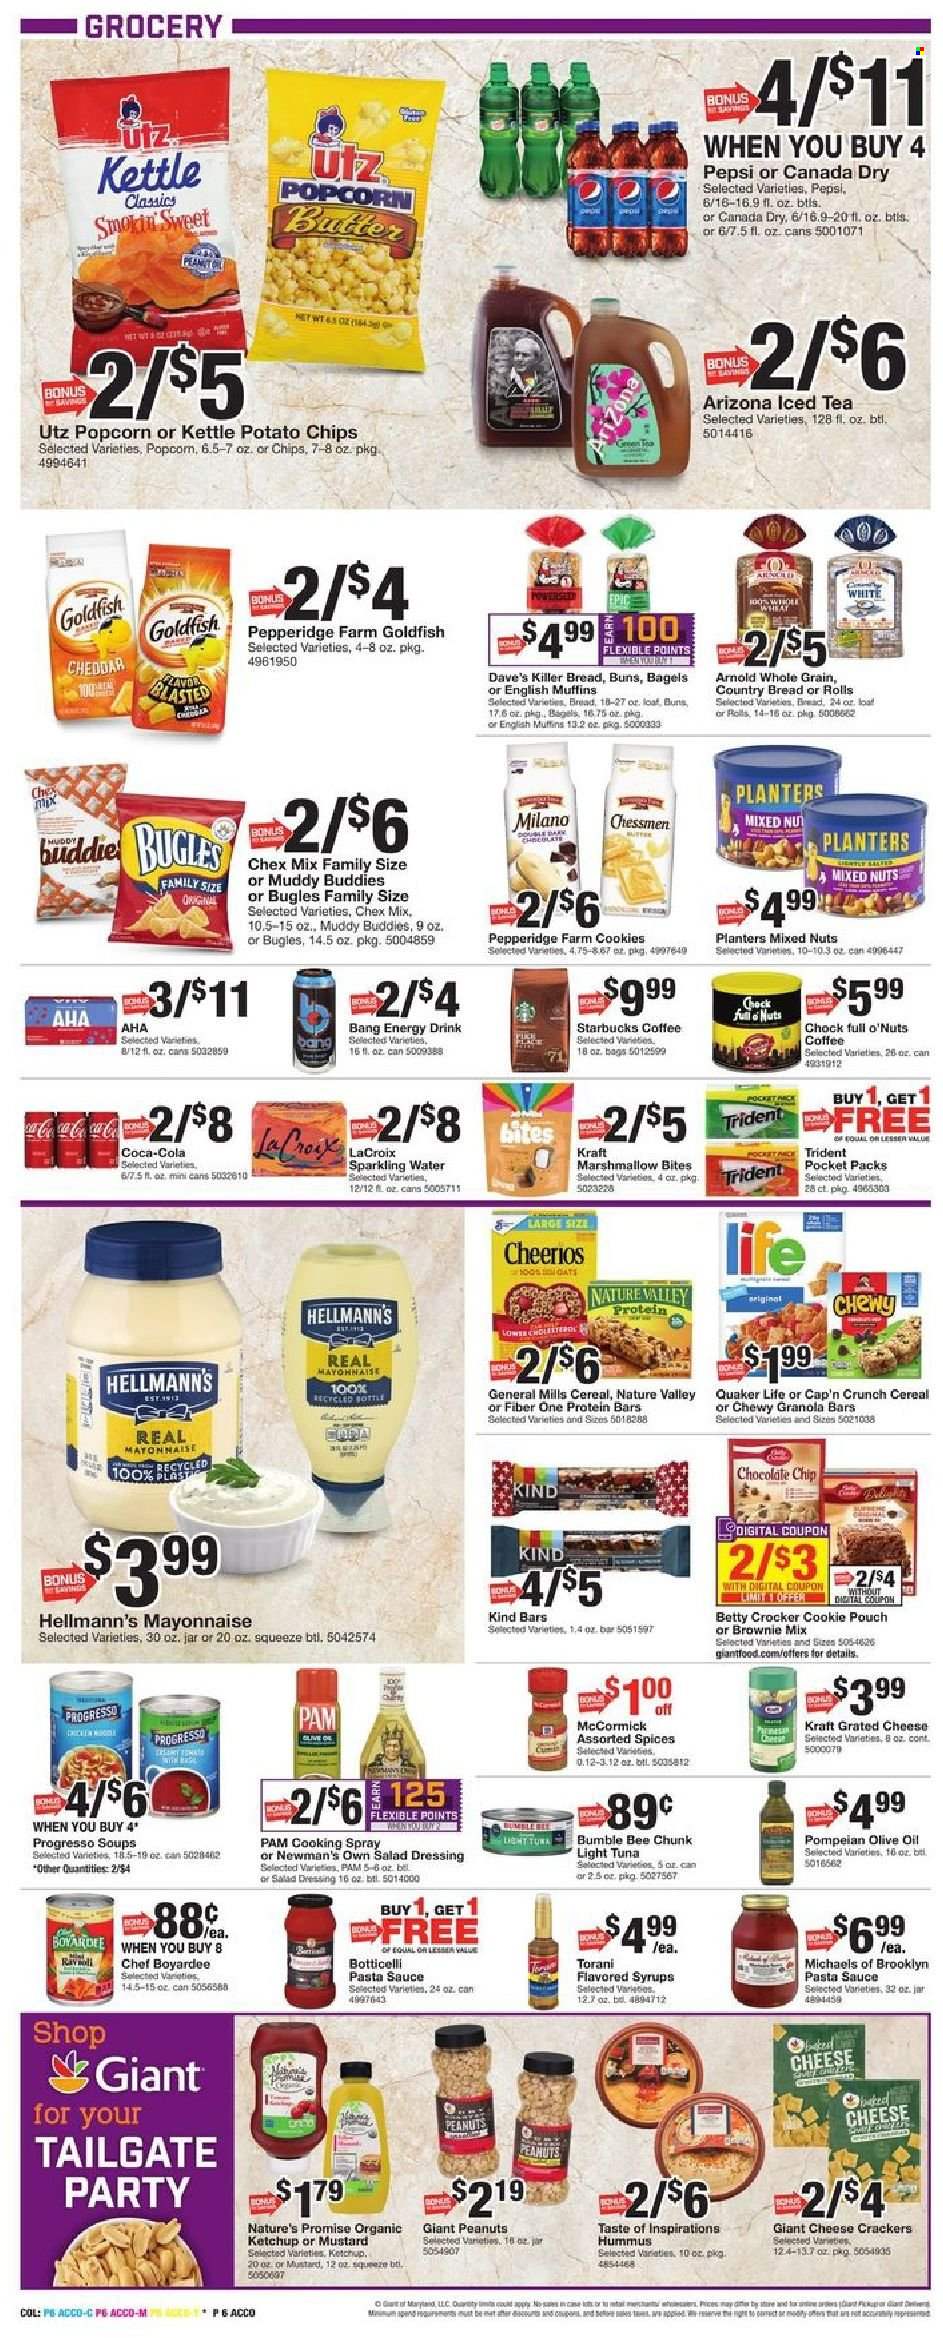 thumbnail - Giant Food Flyer - 09/17/2021 - 09/23/2021 - Sales products - bagels, english muffins, buns, Nature’s Promise, brownie mix, tuna, pasta sauce, Bumble Bee, sauce, Quaker, Progresso, Kraft®, hummus, grated cheese, butter, mayonnaise, Hellmann’s, cookies, marshmallows, crackers, Trident, potato chips, chips, popcorn, Goldfish, Chex Mix, light tuna, Chef Boyardee, cereals, Cheerios, protein bar, granola bar, Cap'n Crunch, Nature Valley, Fiber One, mustard, salad dressing, ketchup, dressing, cooking spray, olive oil, oil, peanuts, mixed nuts, Planters, Canada Dry, Coca-Cola, Pepsi, energy drink, ice tea, AriZona, sparkling water, coffee, Starbucks, beer. Page 6.